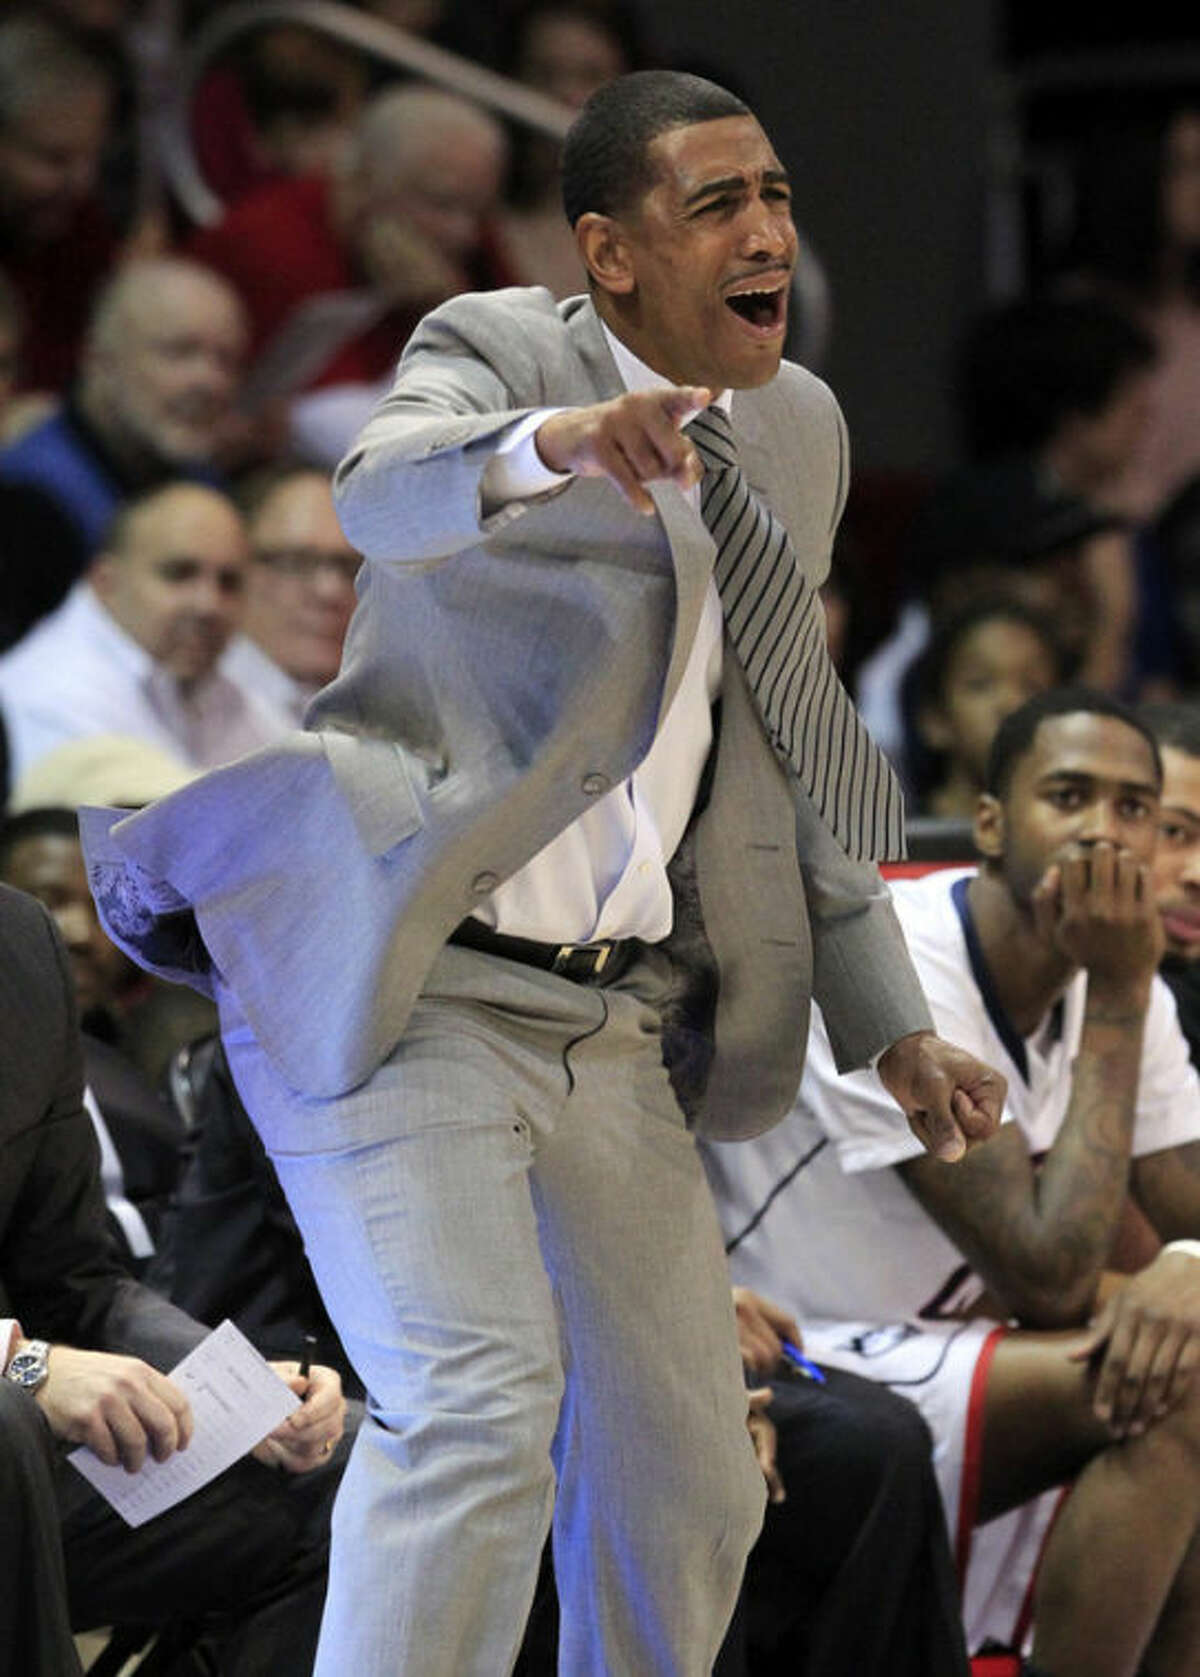 Connecticut head coach Kevin Ollie signals instructions to his team during the first half of a NCAA basketball game against SMU, Saturday, Jan. 4, 2014, in Dallas.  (AP Photo/John F. Rhodes)